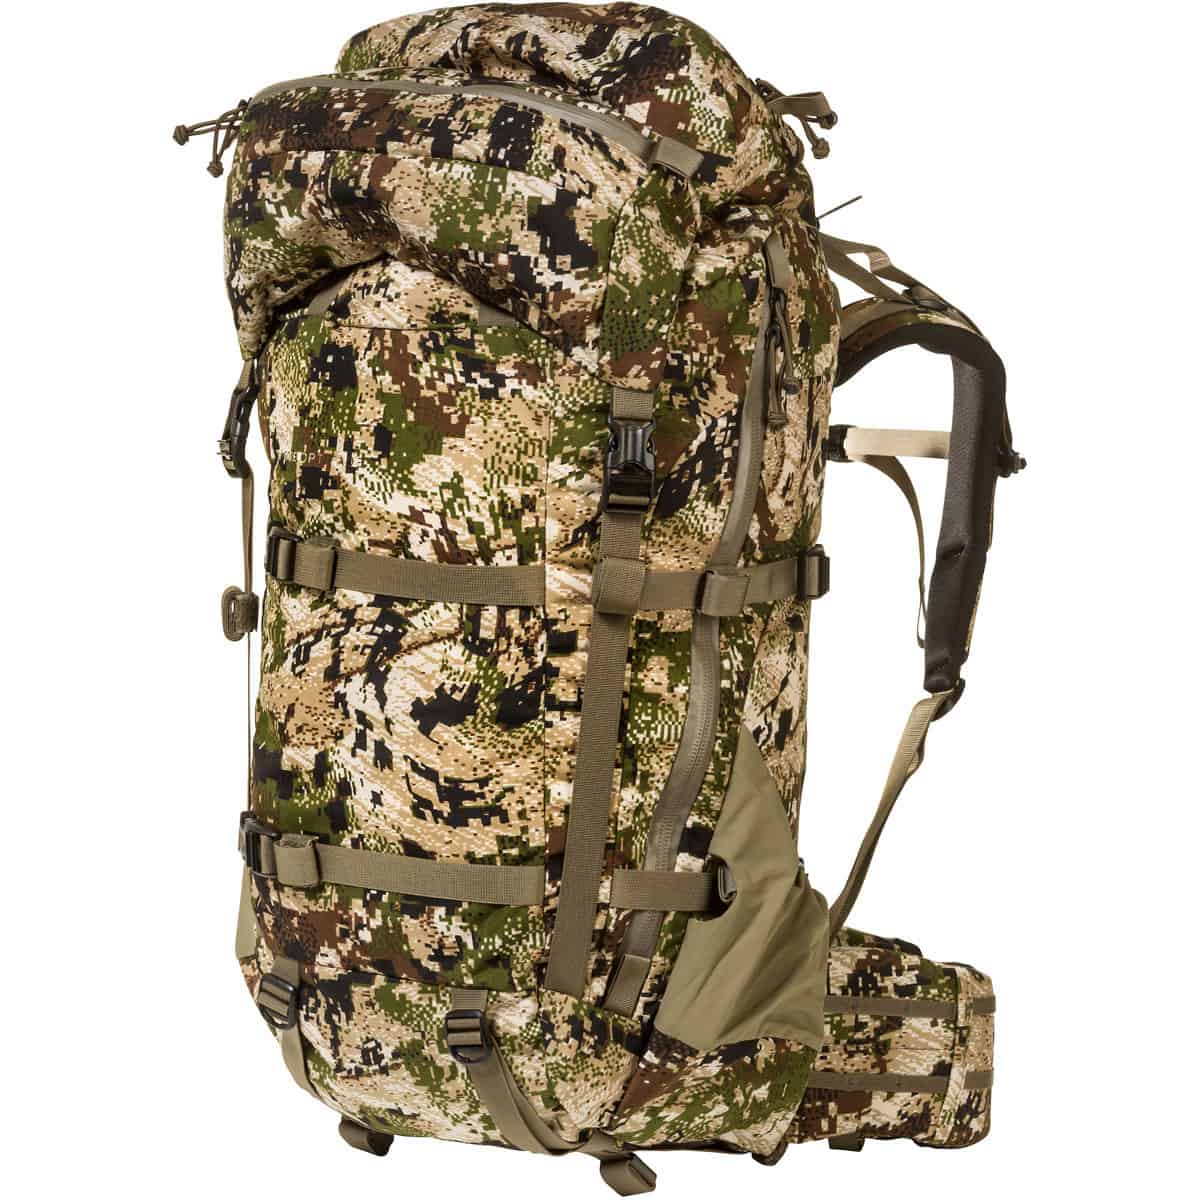 Pack Fly  MYSTERY RANCH Backpacks